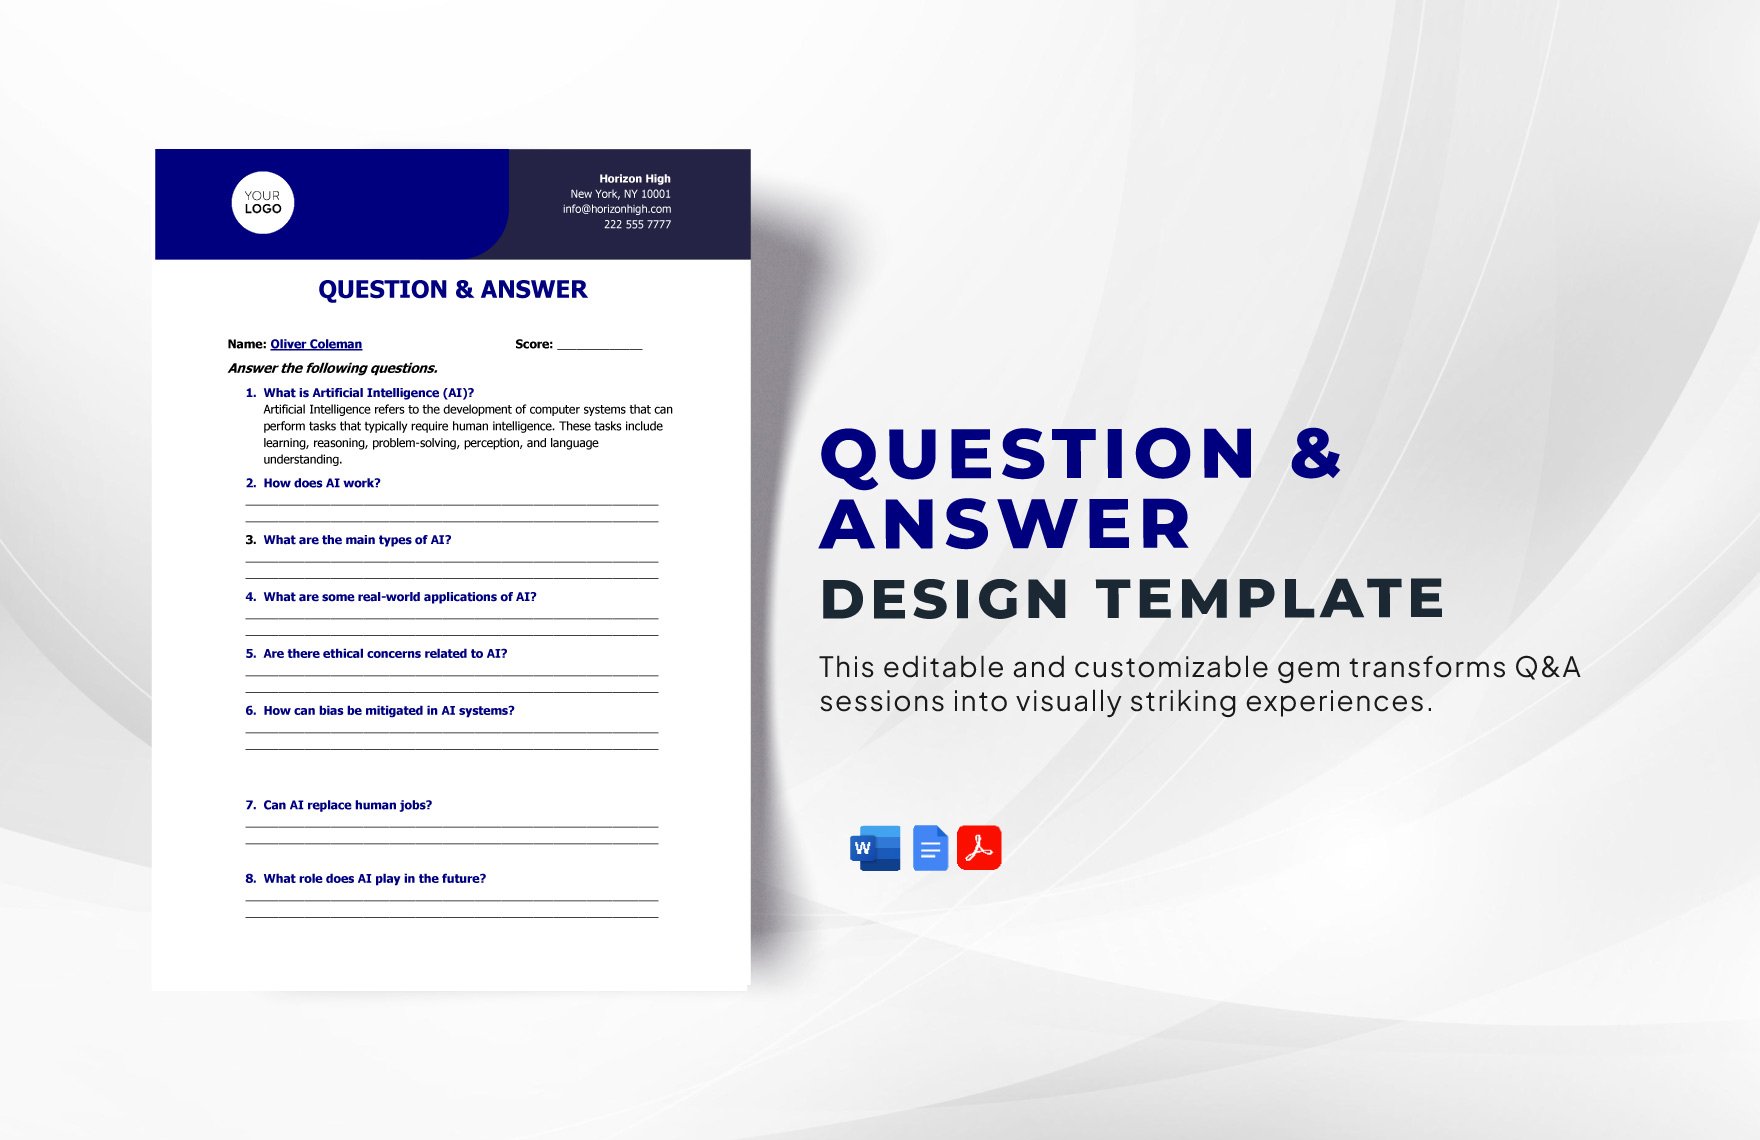 Question & Answer Design Template